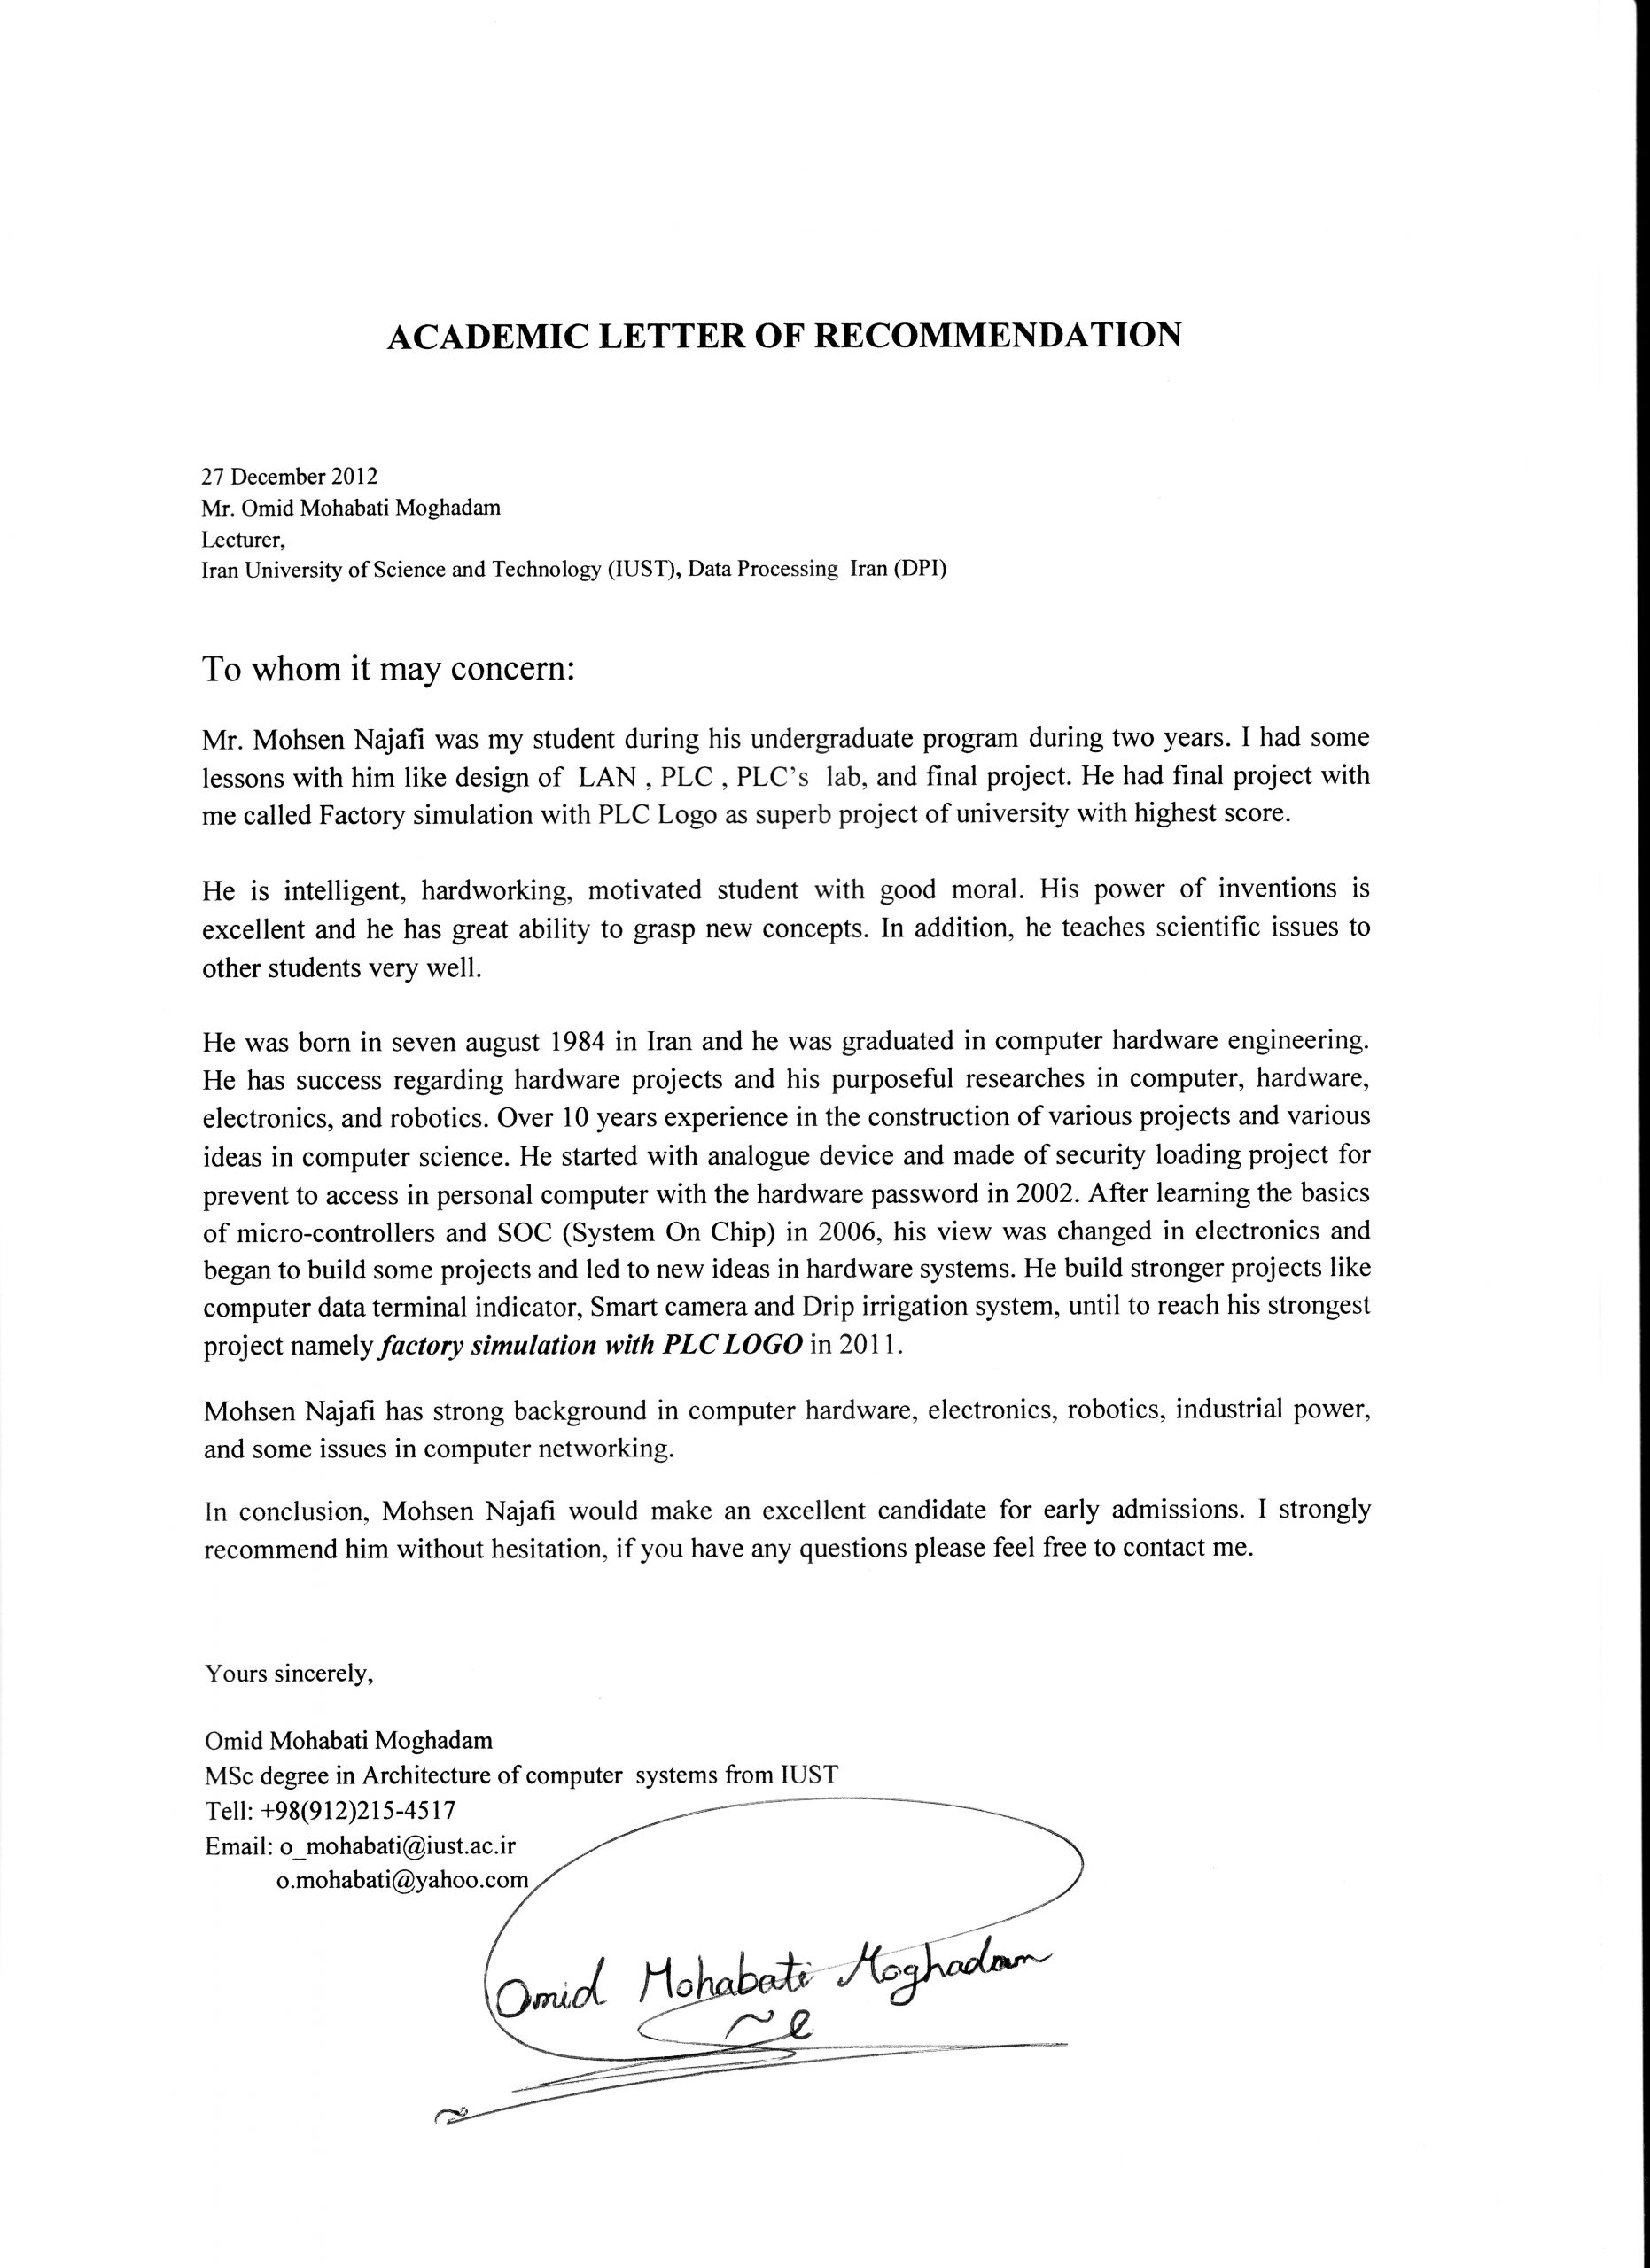 Academic Recommendation Letter with regard to measurements 5104 X 7016